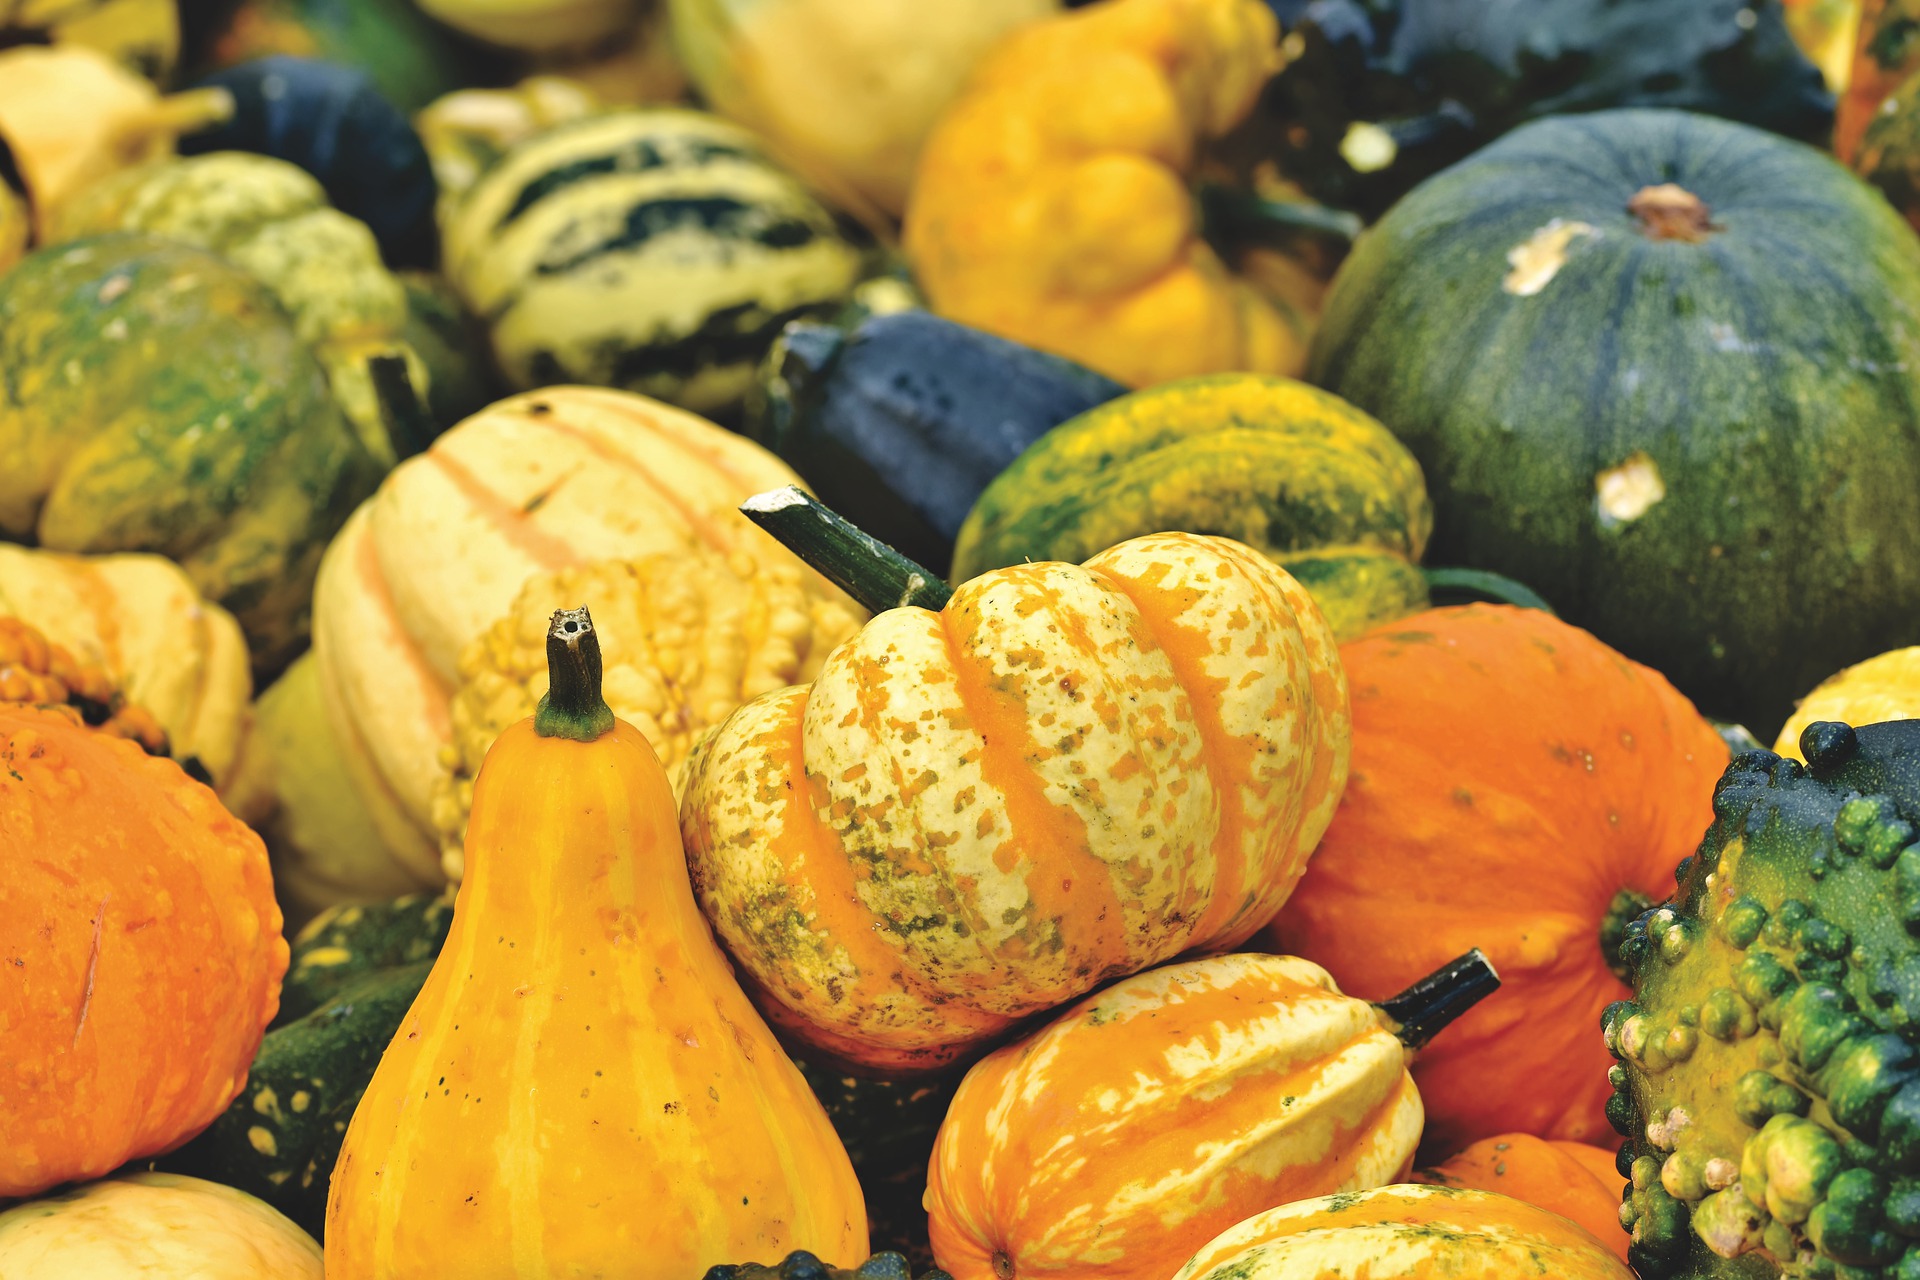 12 fun facts you never knew about pumpkins